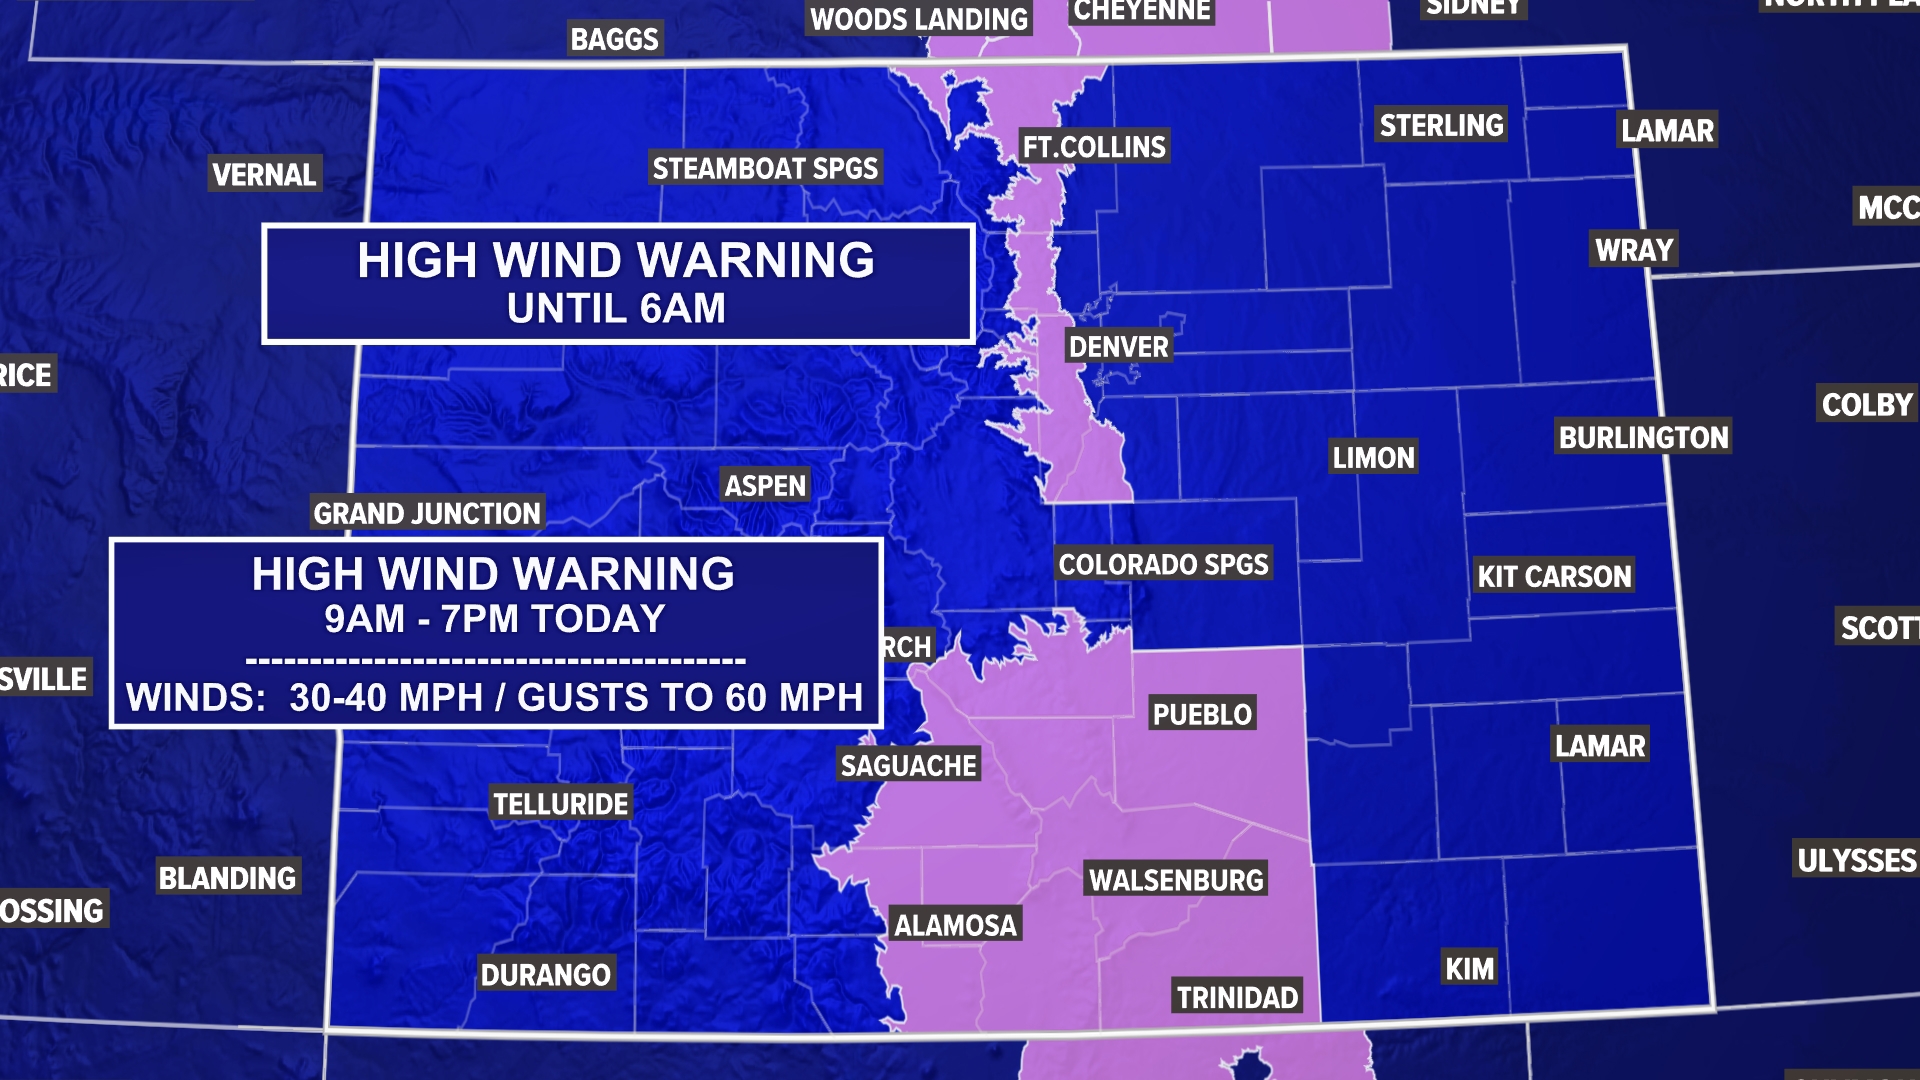 Gusts up to 50 mph are possible around Denver again on Tuesday with highs topping out near 60 degrees. Lighter winds are on tap for Wednesday.